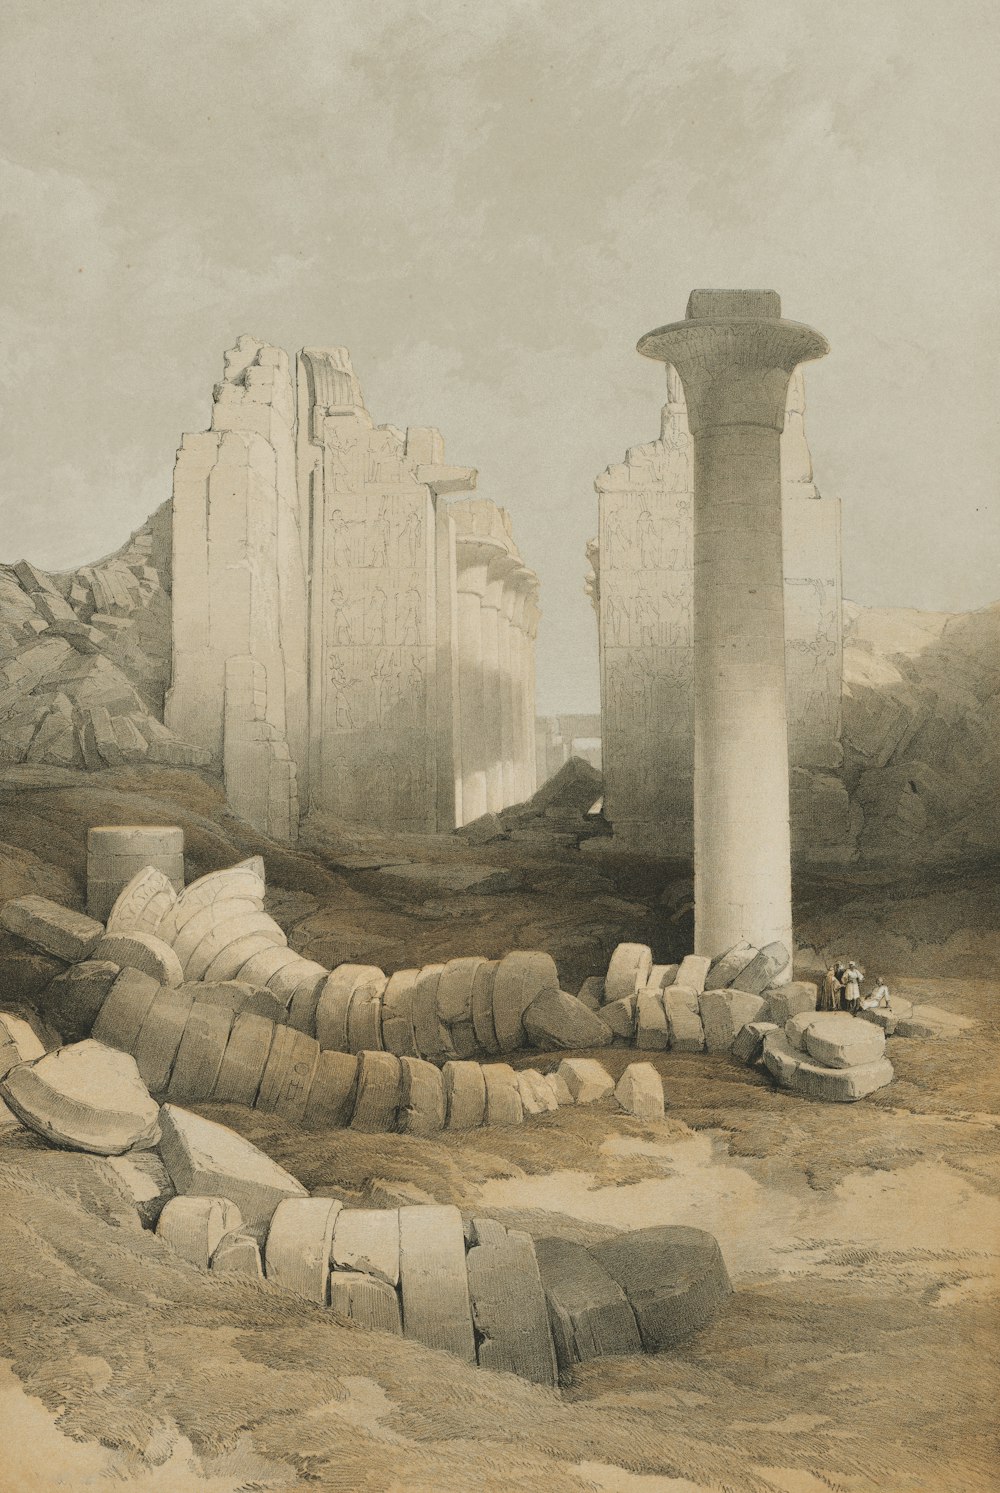 a drawing of a group of ruins in the desert